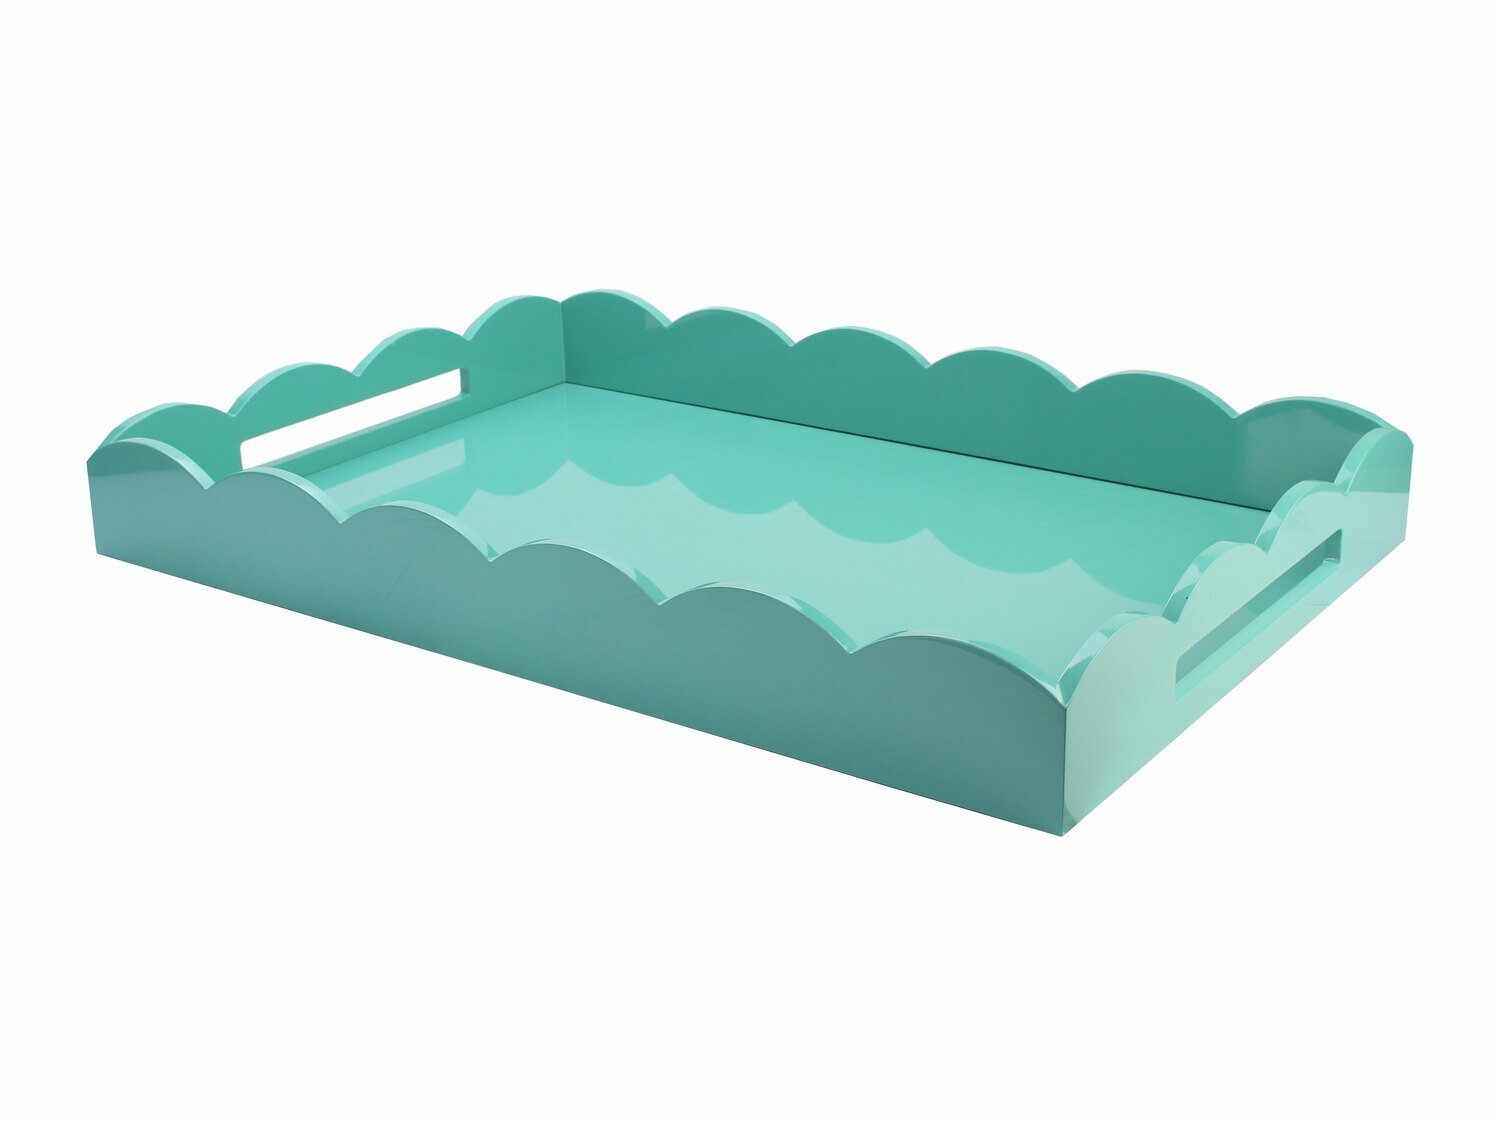 Addison Ross Turquoise Scalloped Edge Tray 17 x 13 Inch Lacquer TR3506